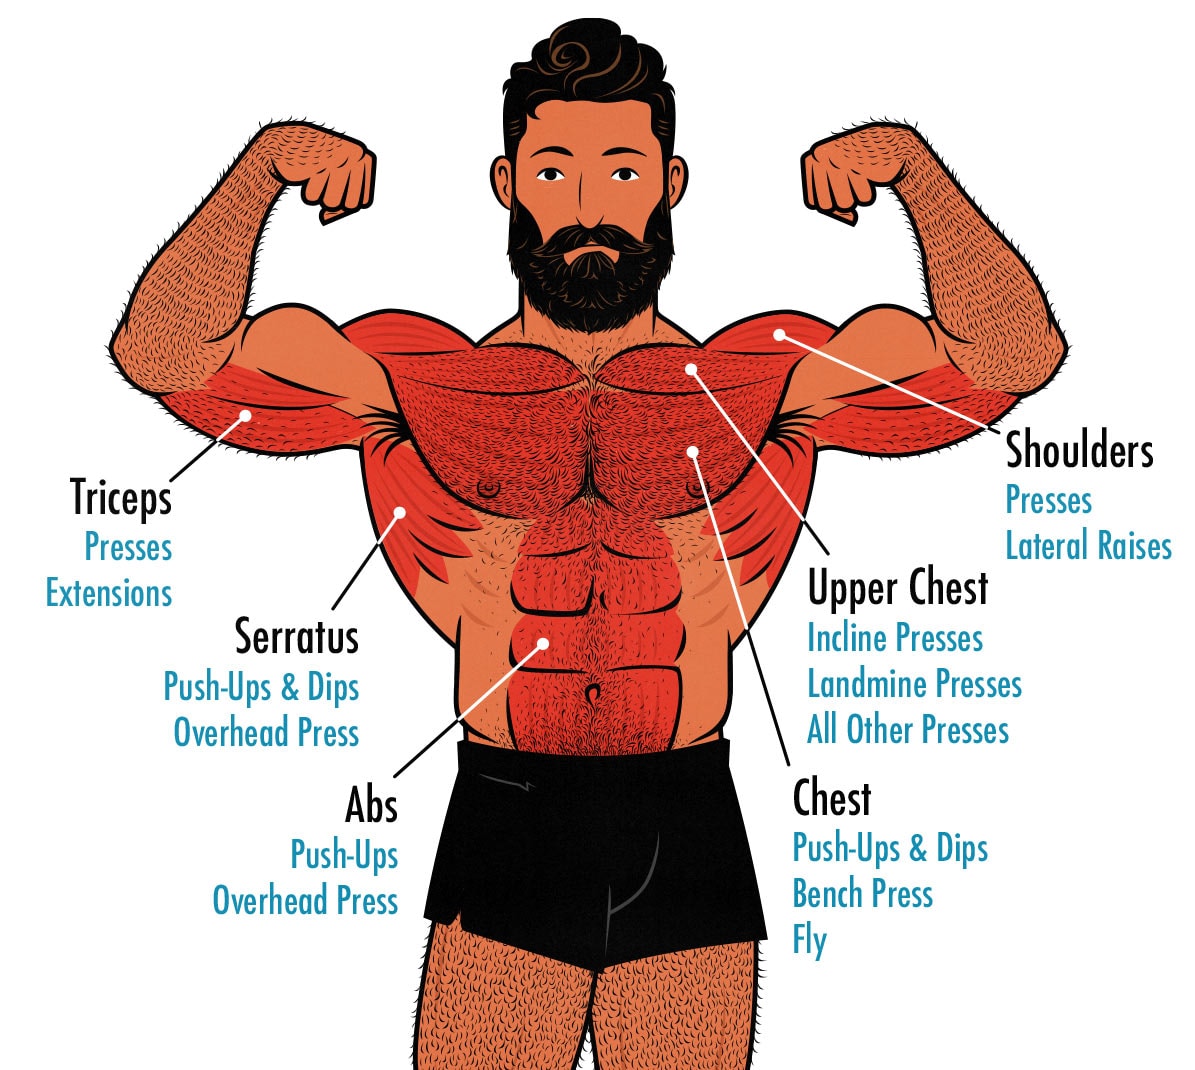 Diagram showing the muscles worked during Push Day workouts.